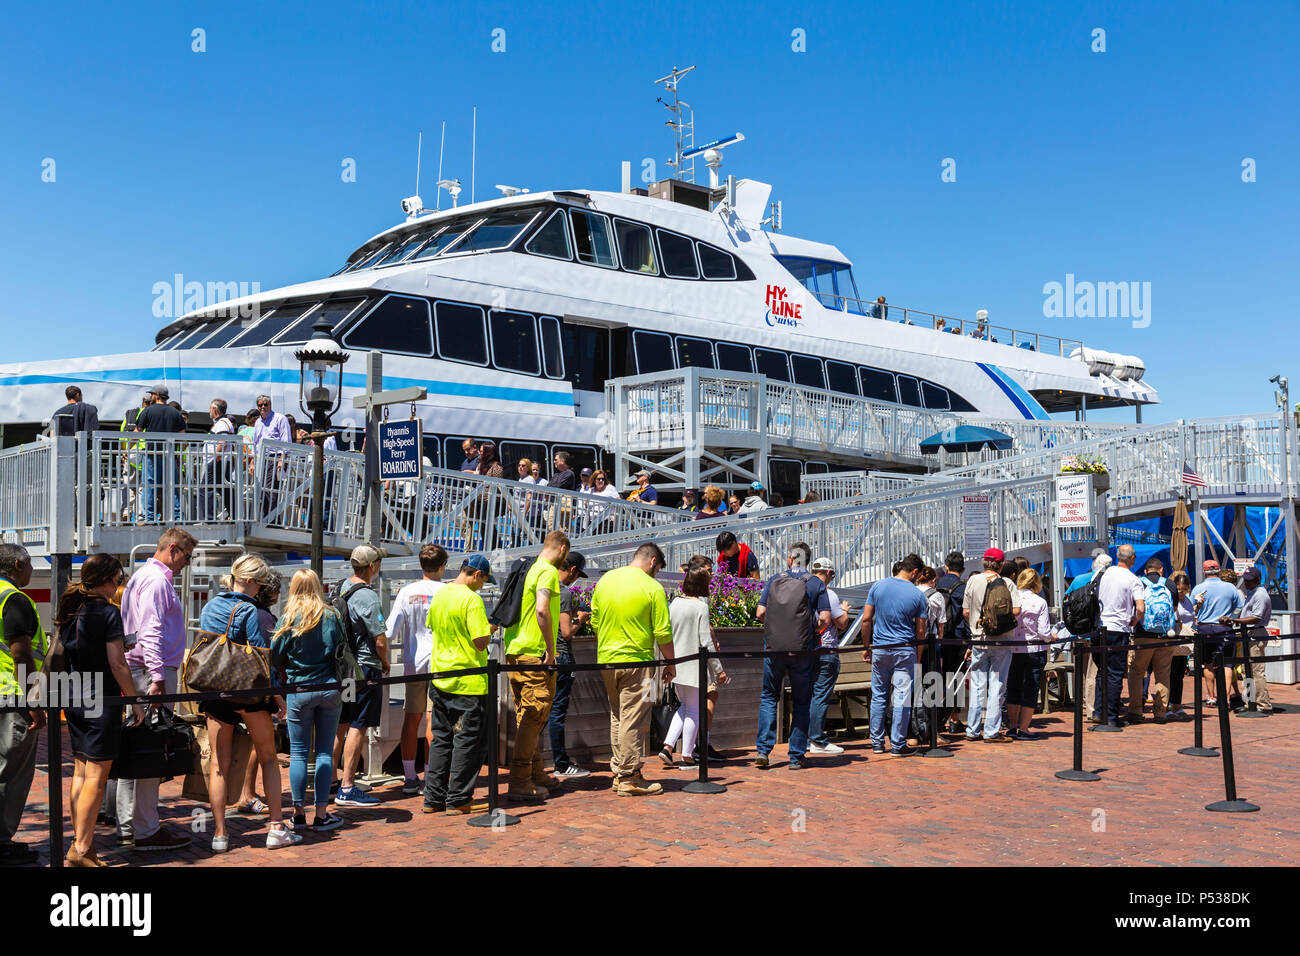 Passengers board a Hy-Line Cruises high-speed catamaran ferry, bound for Hyannis on the mainland, in Nantucket, Massachusetts. Stock Photo